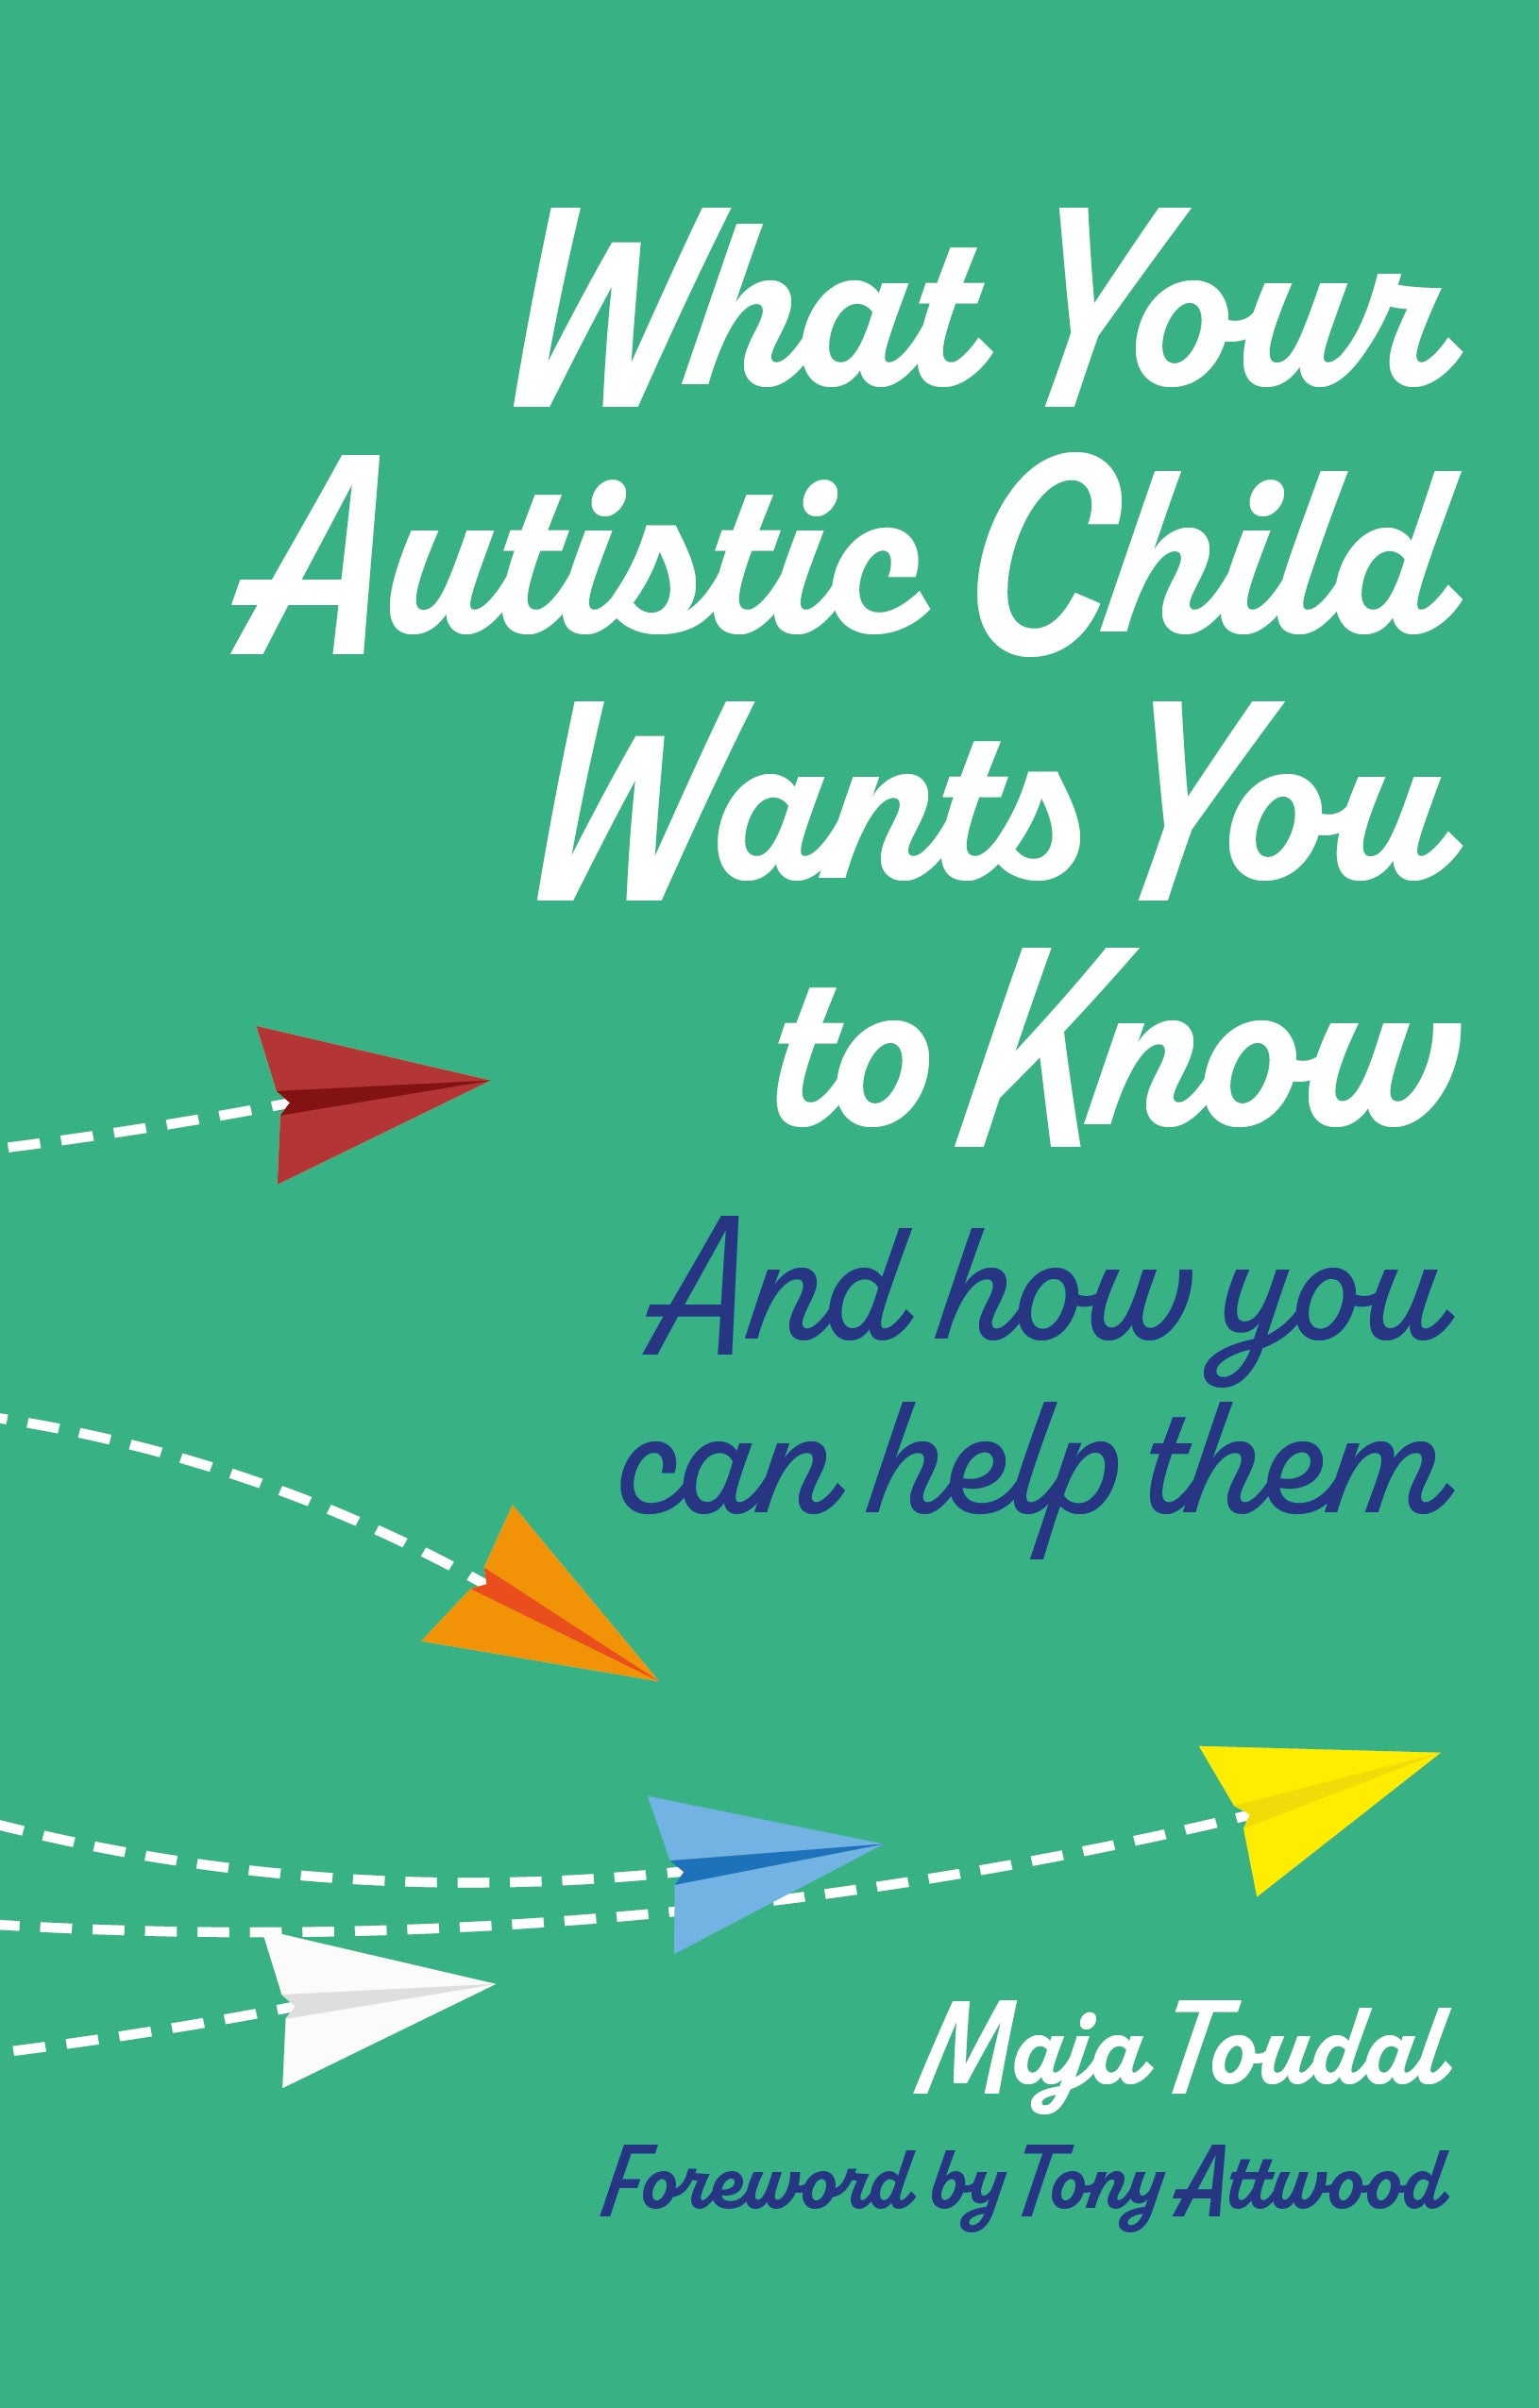 What Your Autistic Child Wants You to Know by Maja Toudal